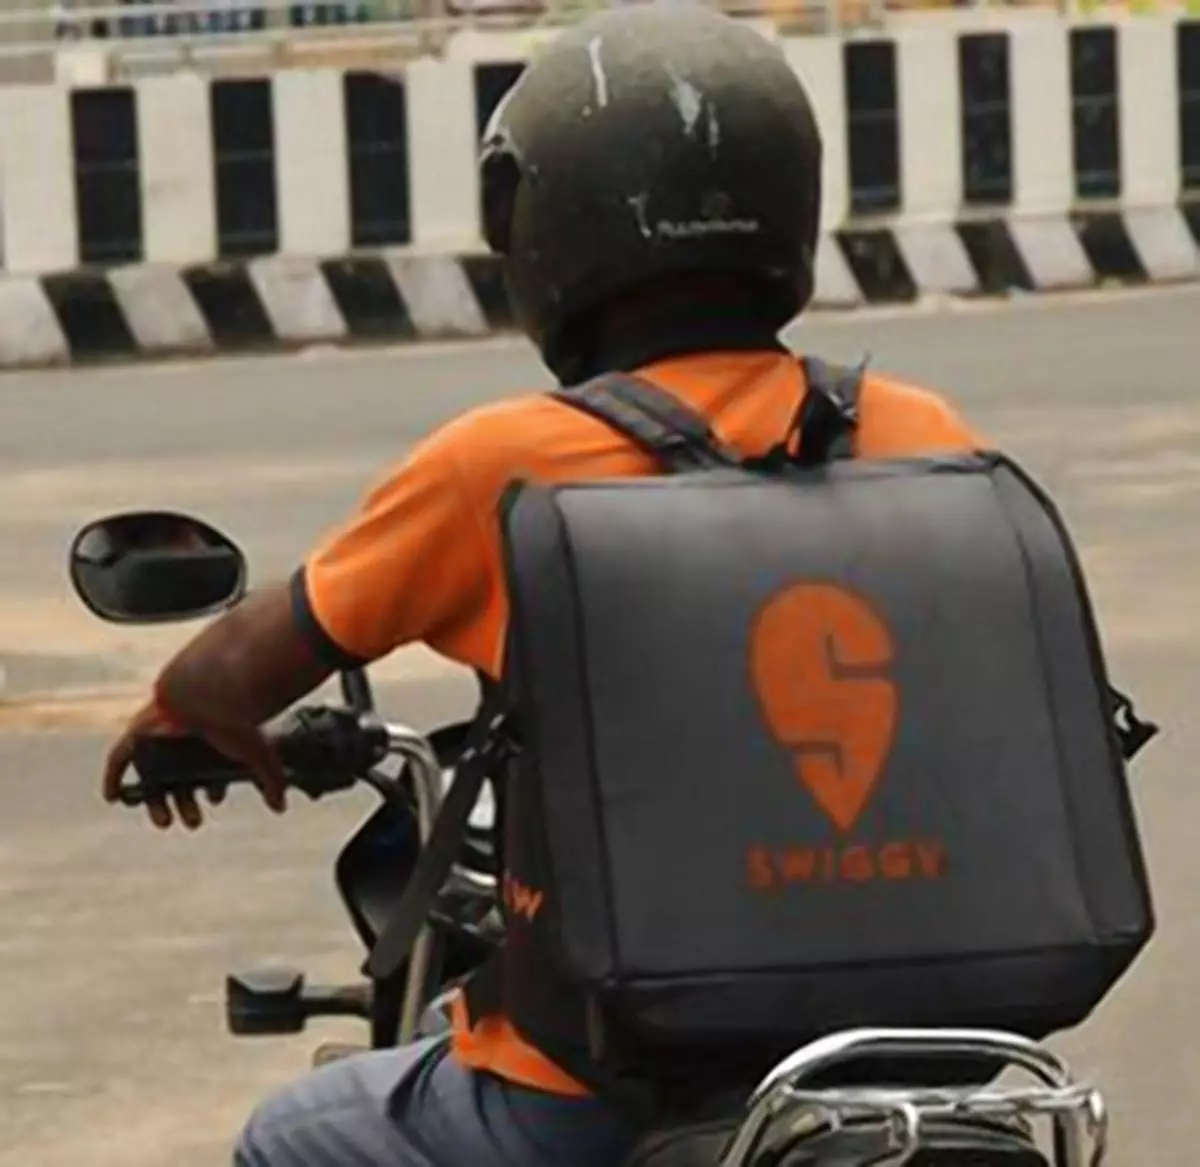 There have been many first-time users in new categories like groceries,  alcohol, Genie”: Srivats TS, Swiggy